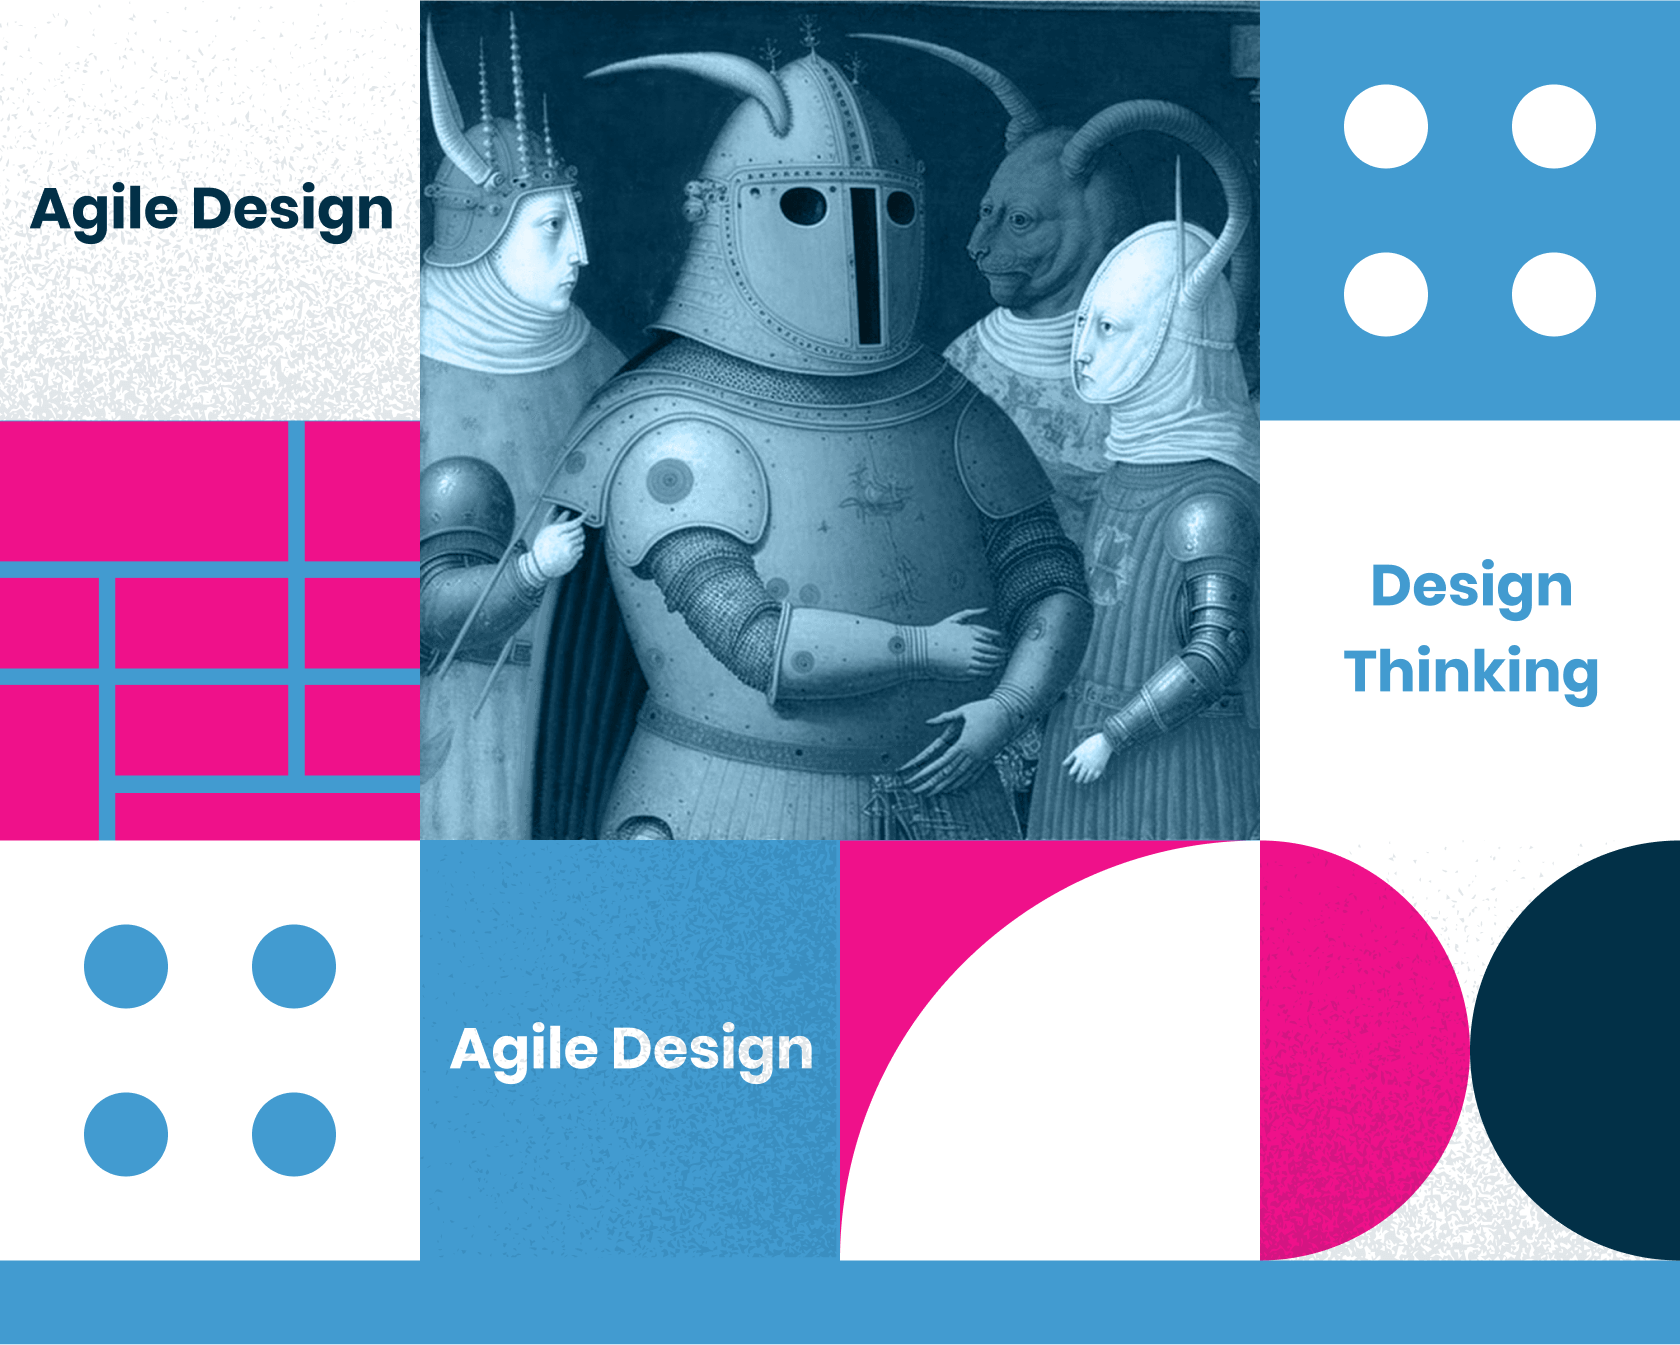 Design Thinking and Agile